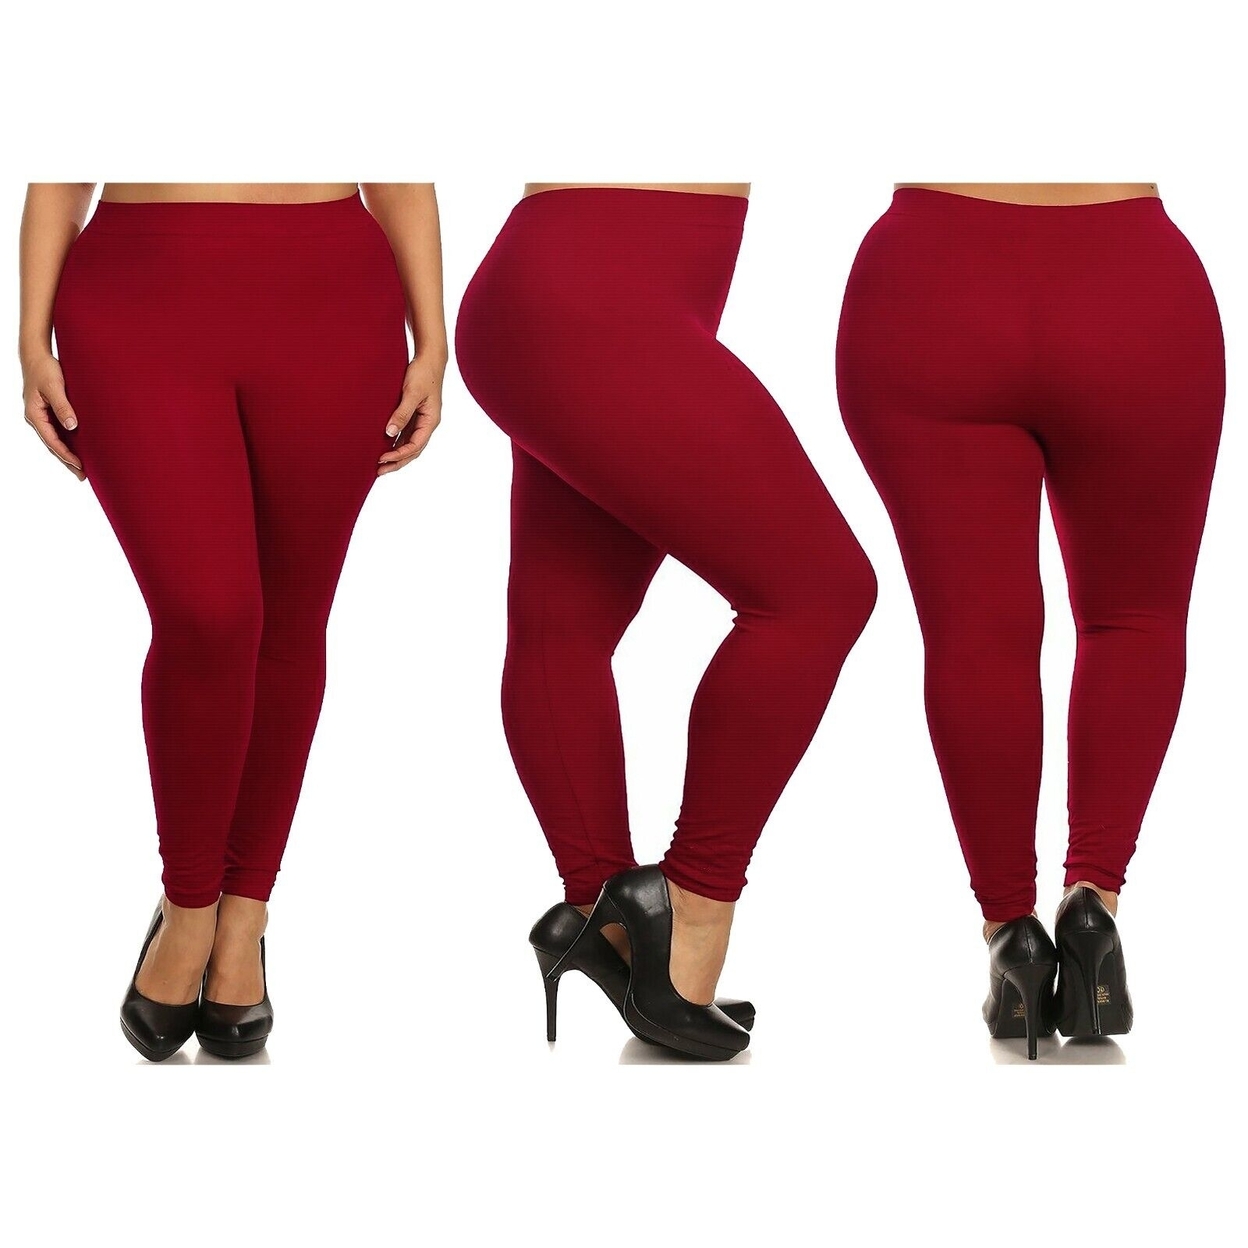 Multi-Pack: Women's Casual Ultra-Soft Smooth High Waisted Athletic Active Yoga Leggings Plus Size Available - 1-pack, 3x